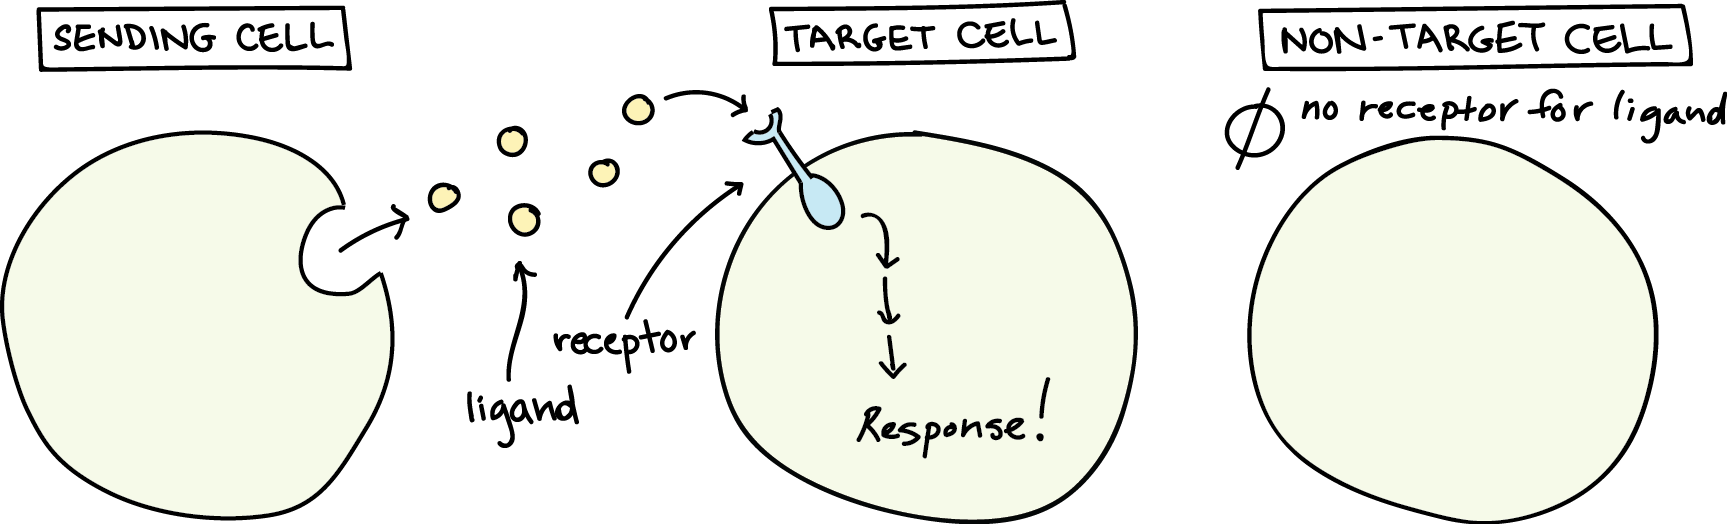 Simplified description of cell signaling